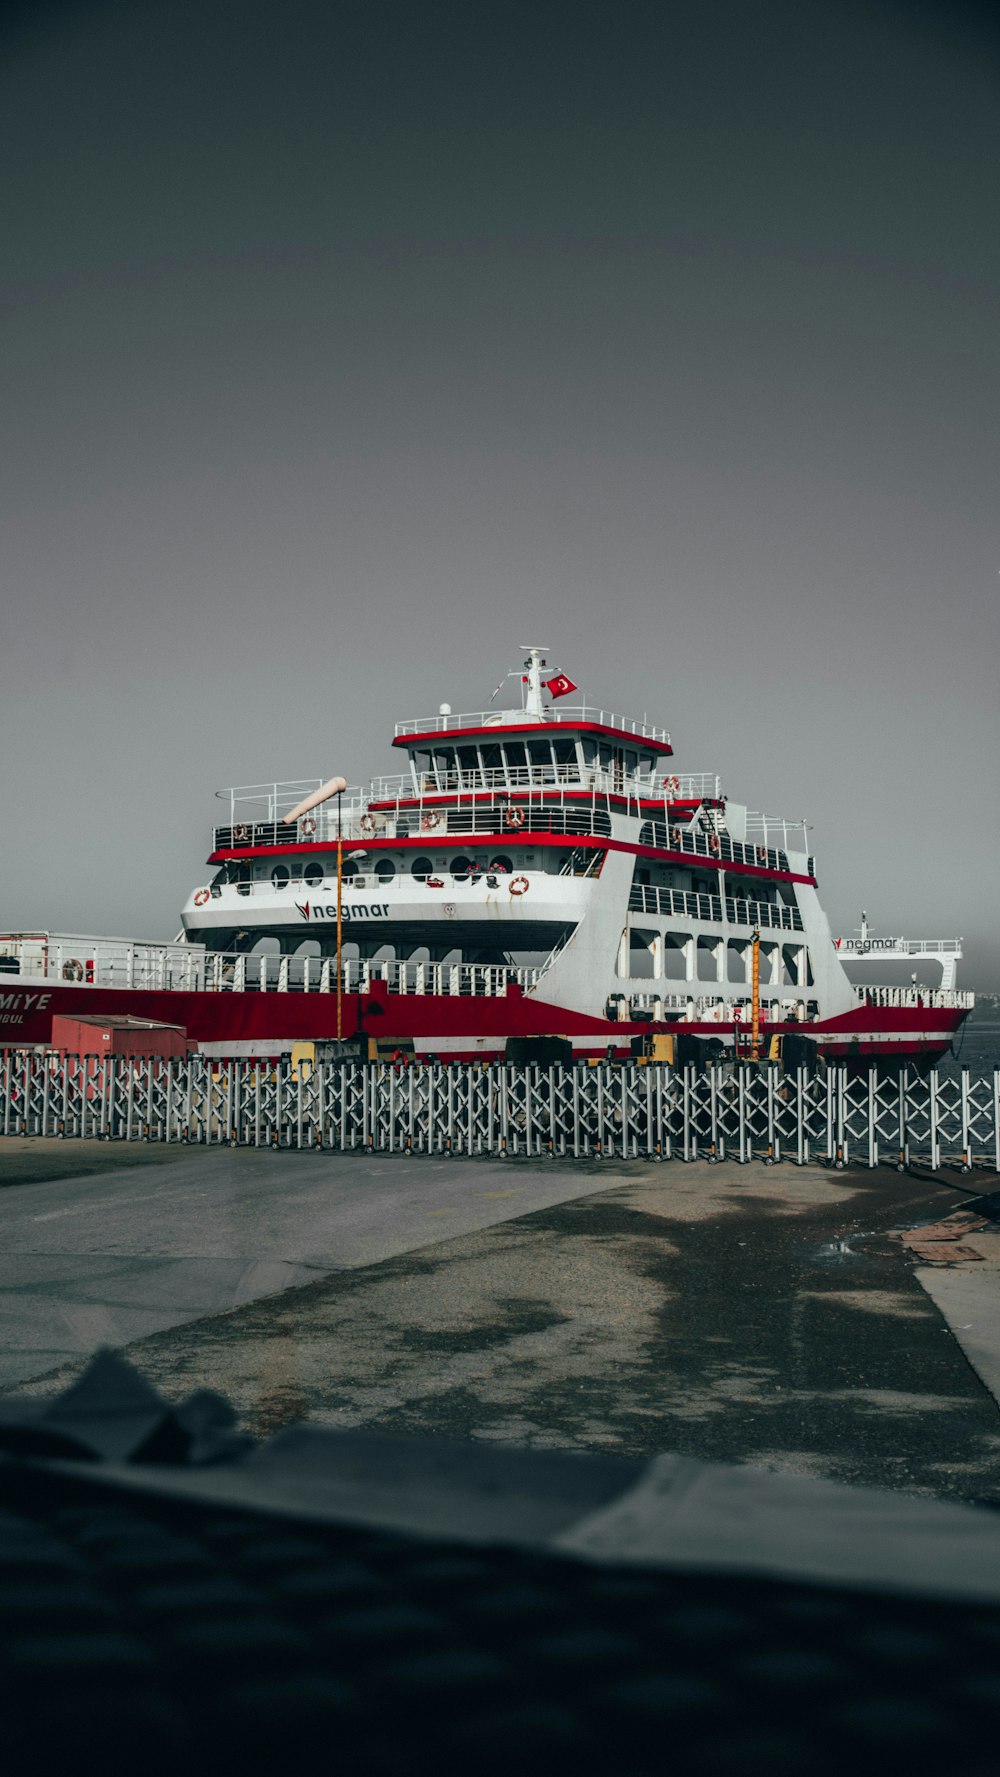 red and white ship on dock during daytime